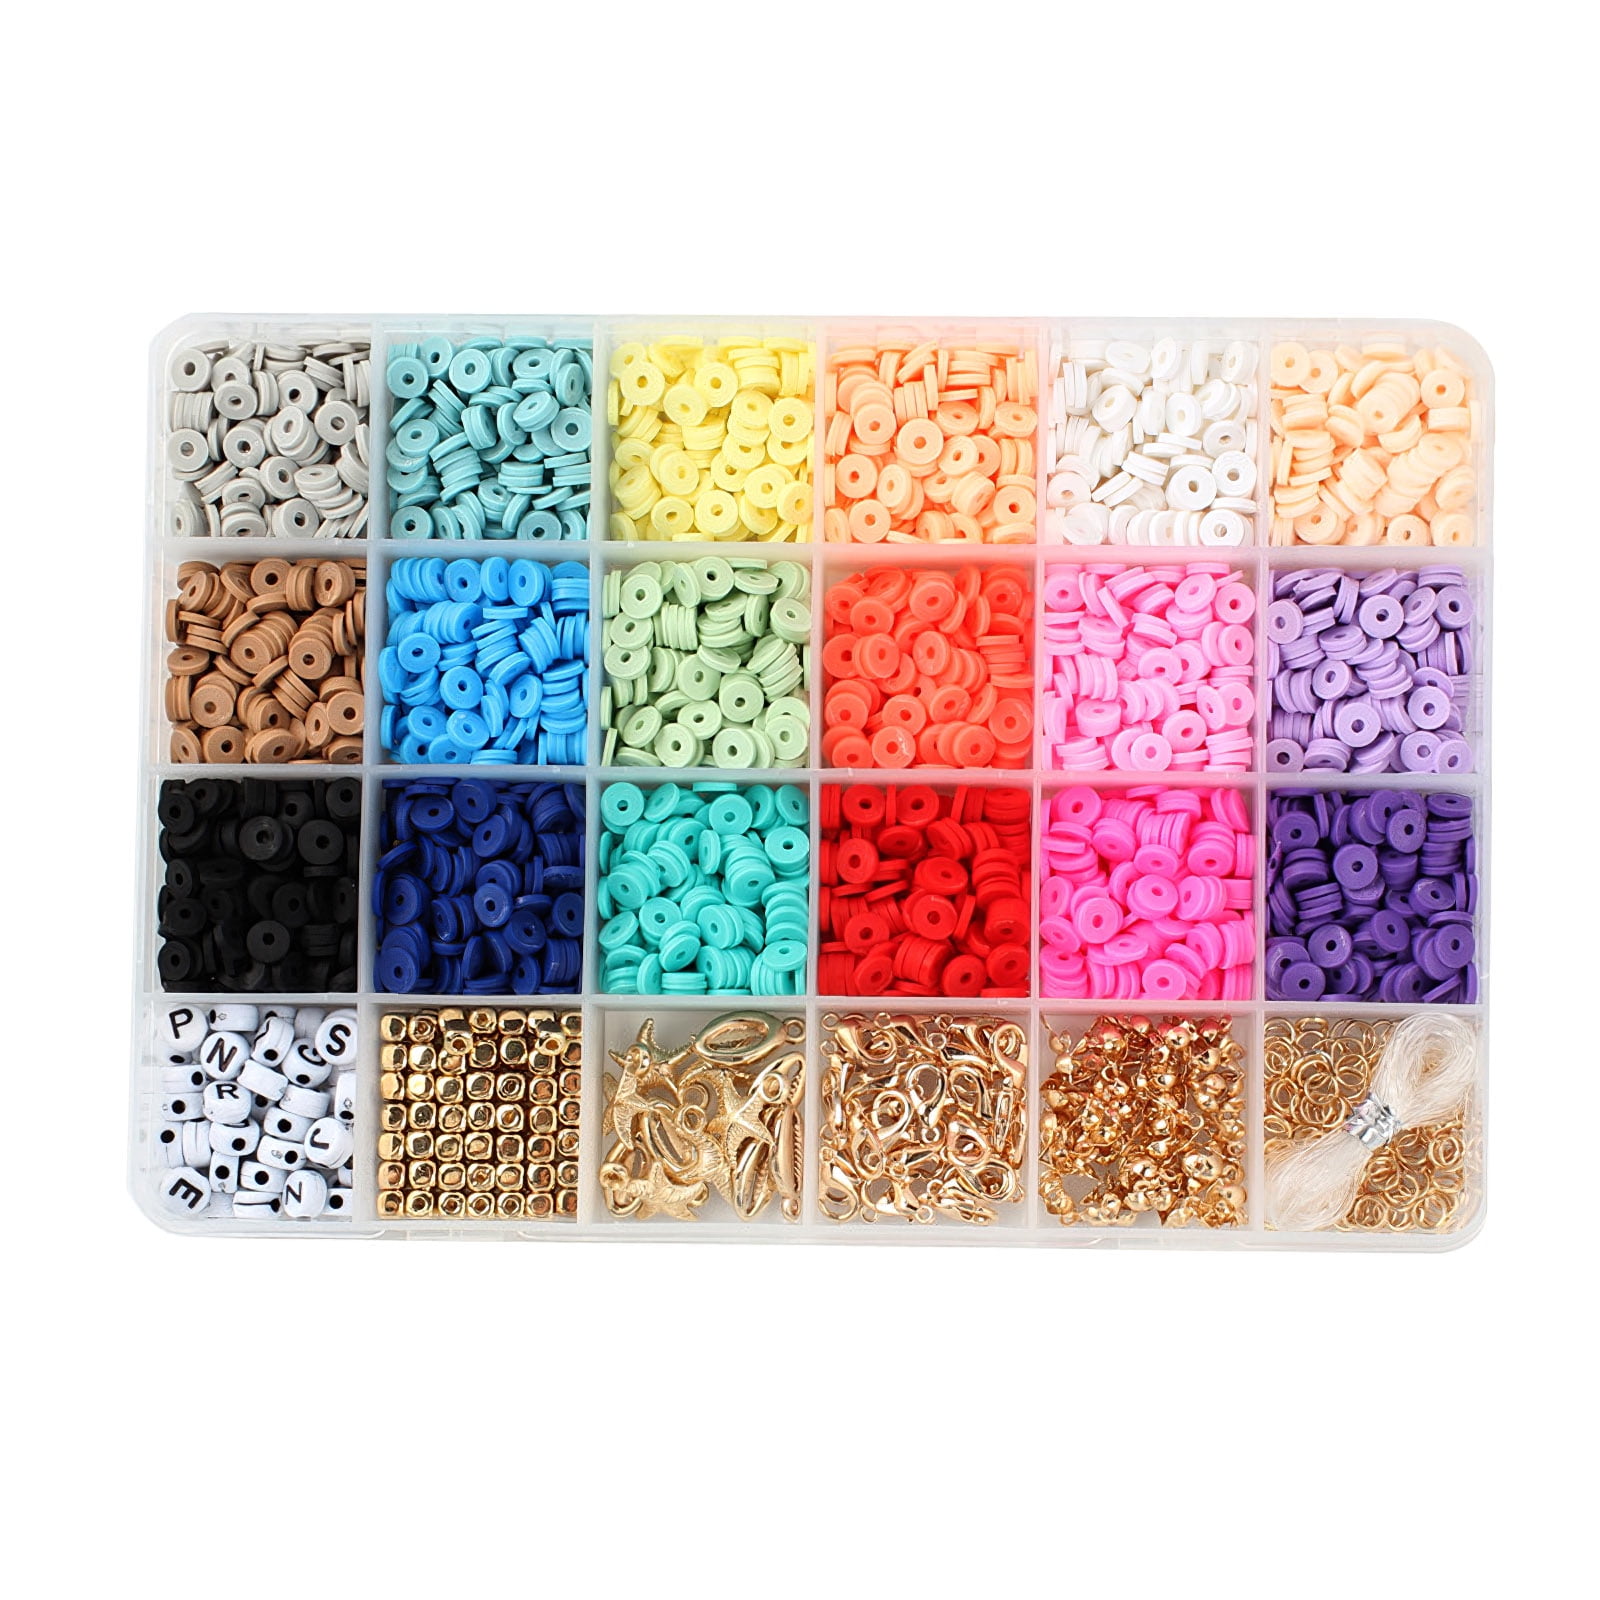 QUEFE 10800pcs Clay Beads for Friendship Bracelet Making Kit, 108 Colors  Polymer Heishi Beads for Girls 8-12, Letter Beads for Jewelry Making Kit,  for